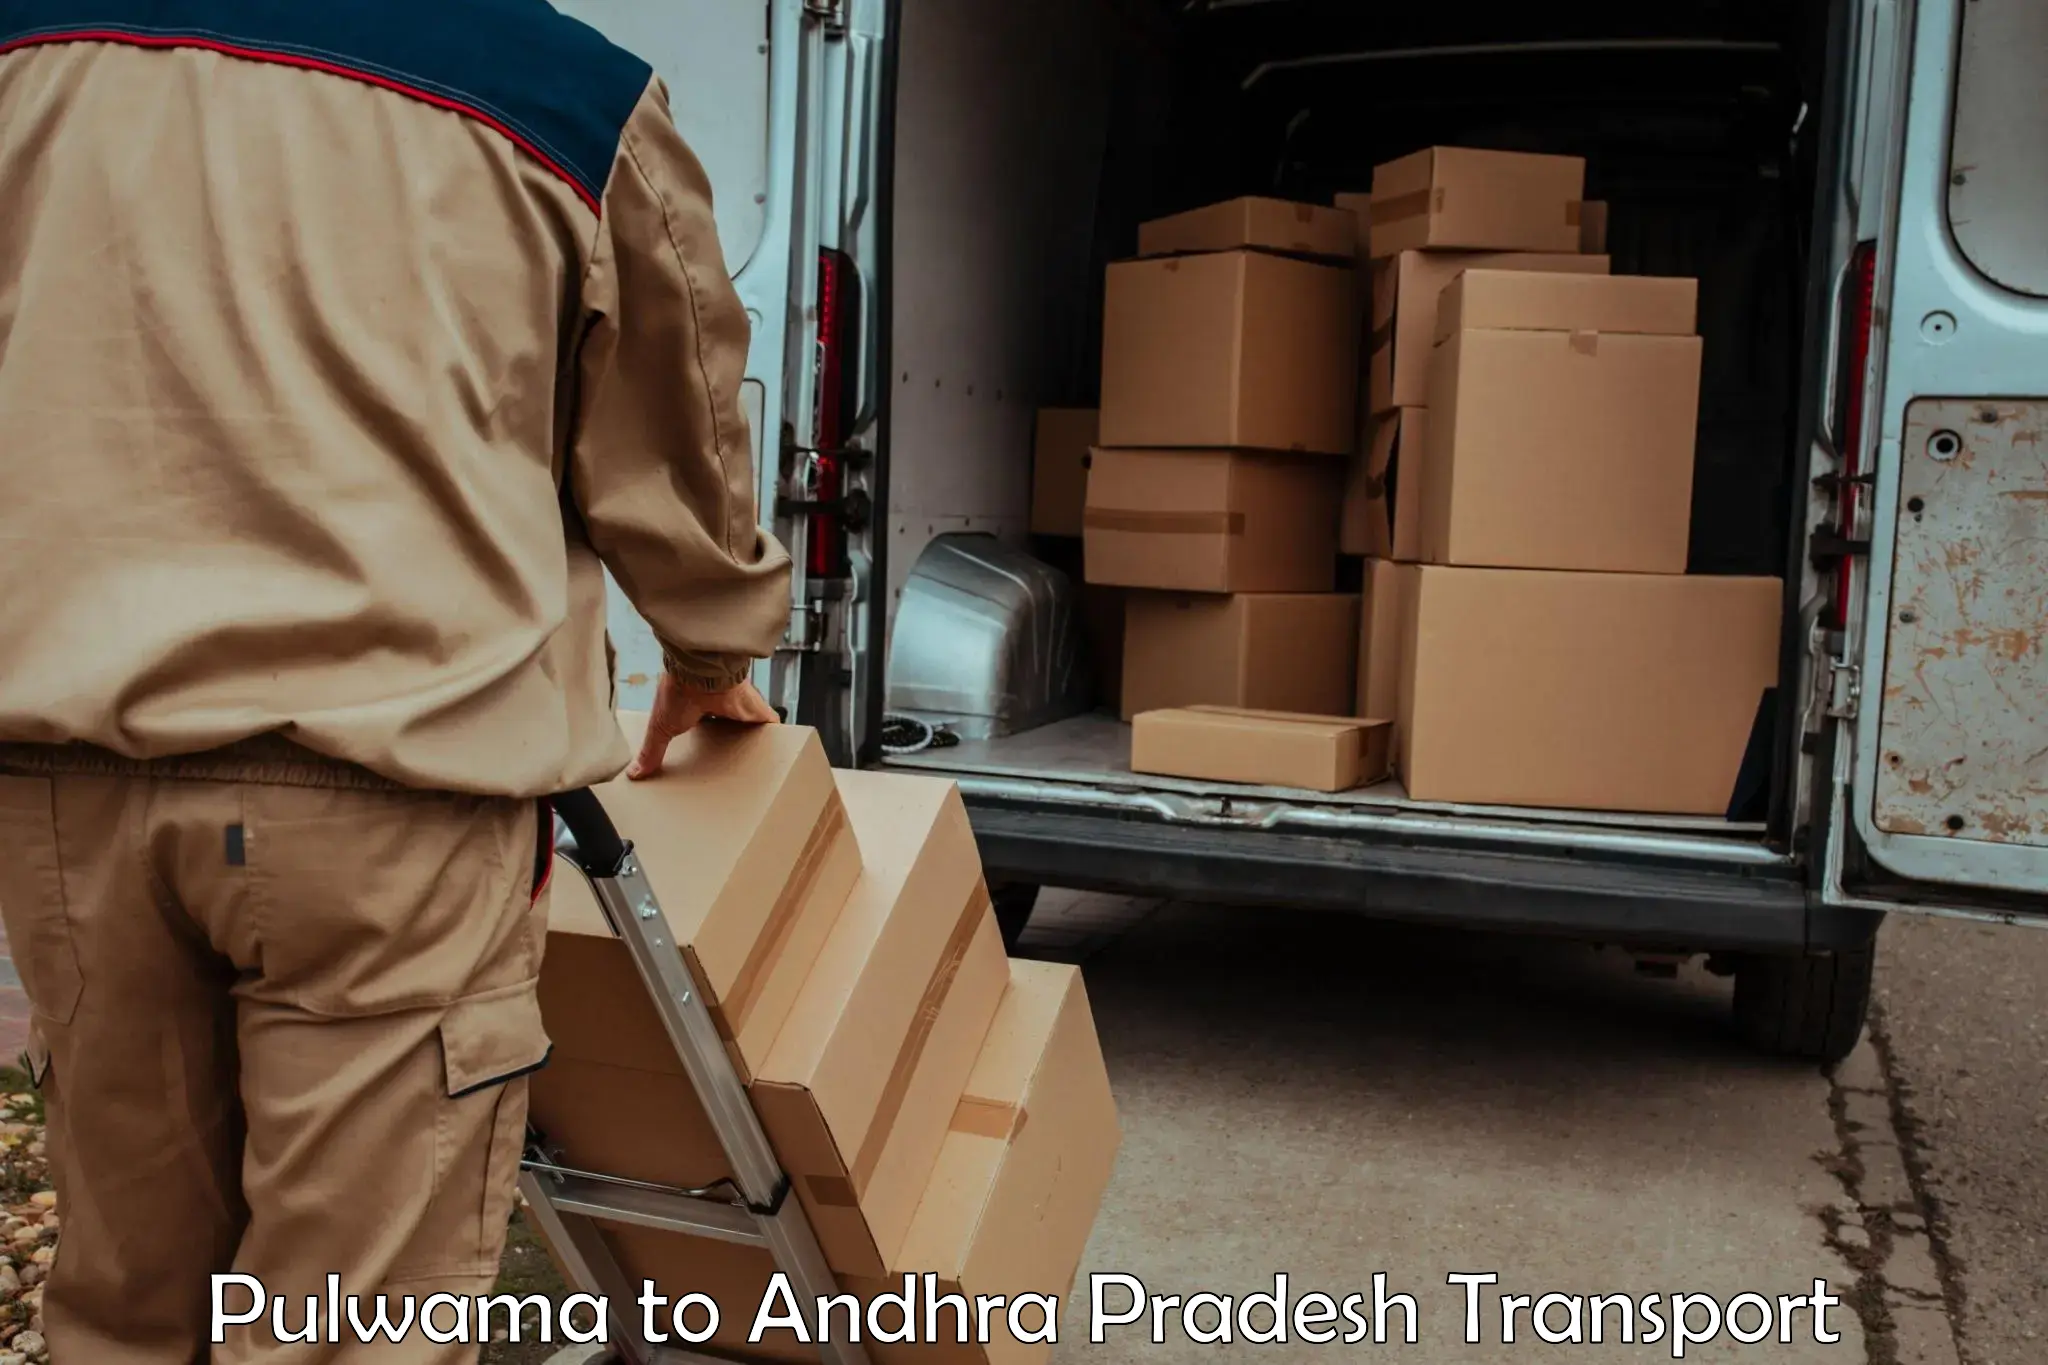 Delivery service Pulwama to Kothapalli